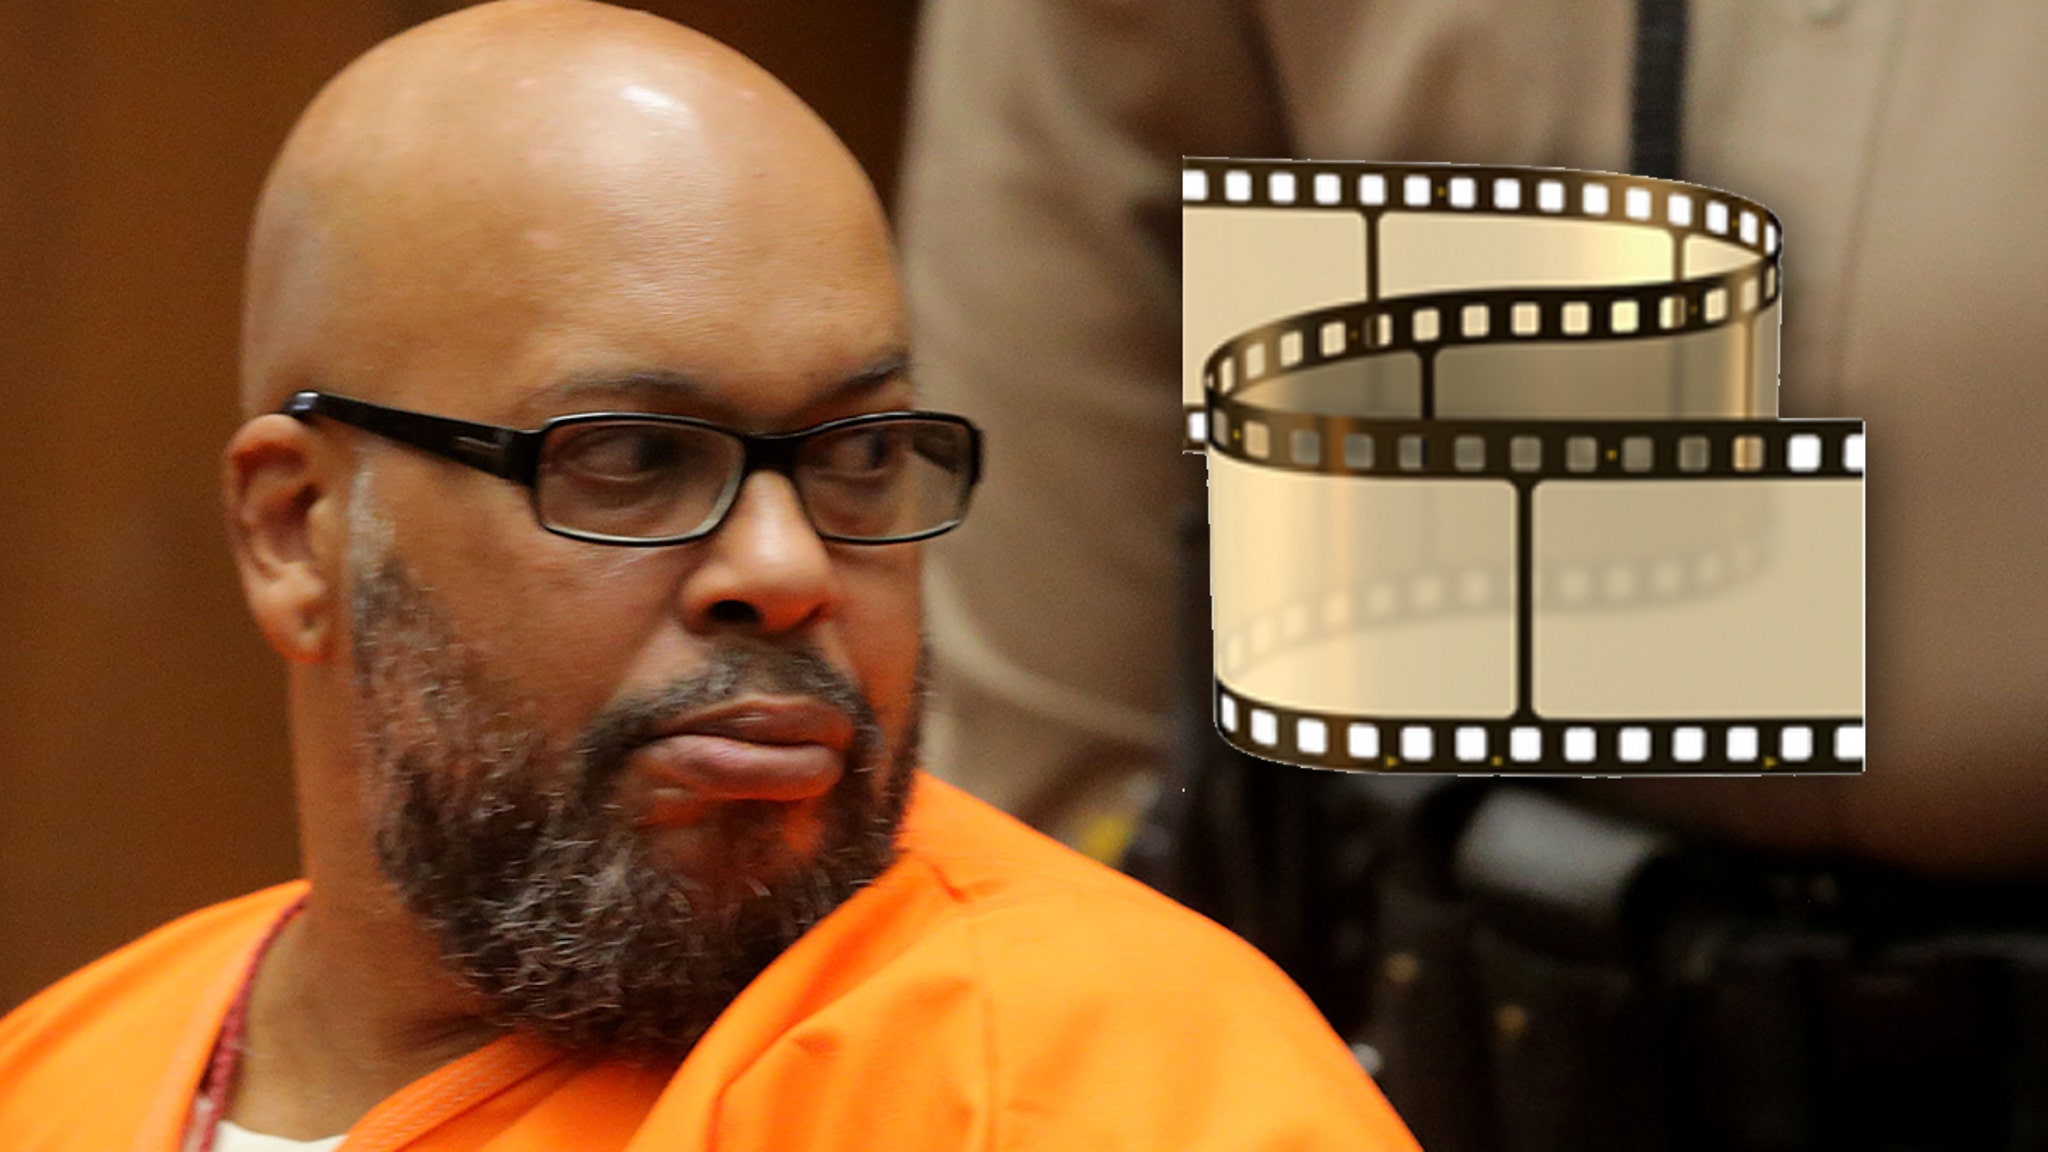 Suge Knight plans to tell life stories through biographical series ‘BMF’.